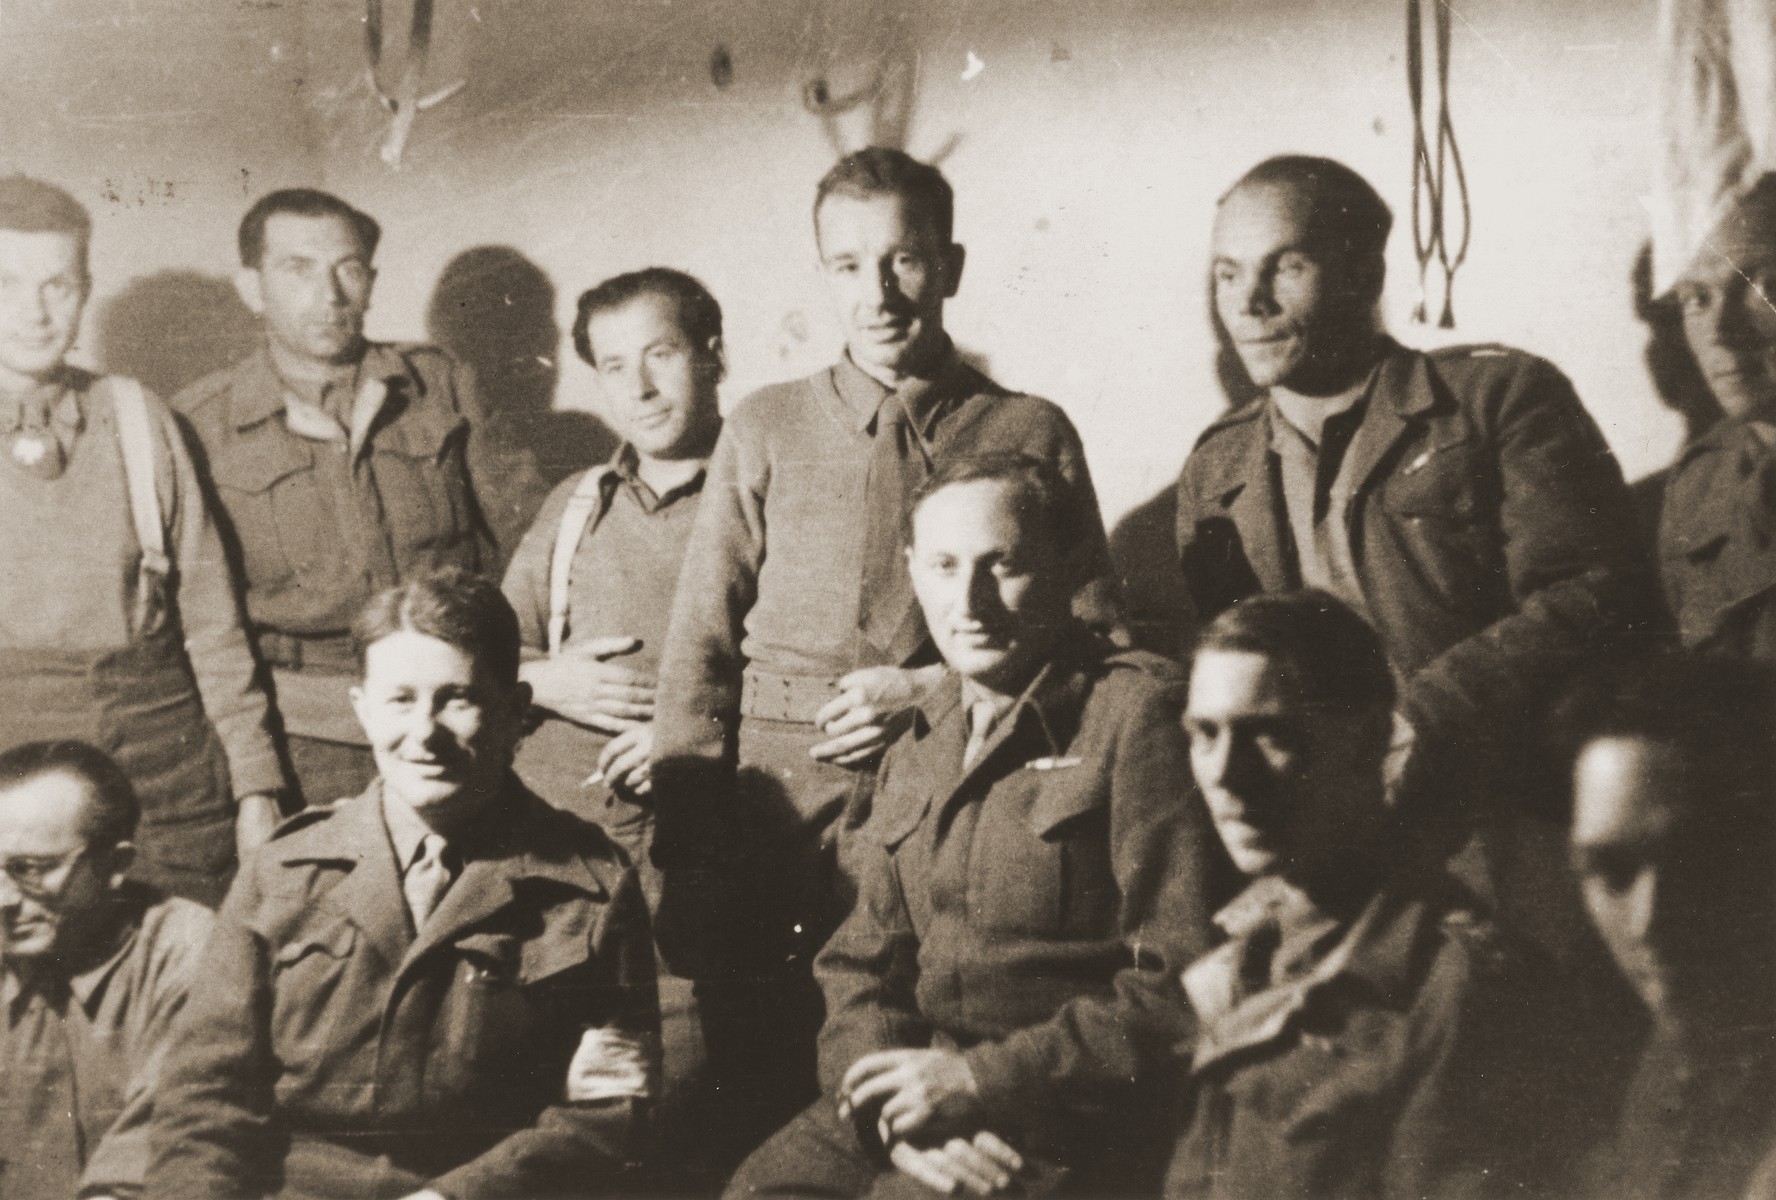 Group portrait of members of the Anders Army.

Dr. Arthur Haber, originally from Krakow, survived the war as a doctor in the Anders Army.  His wife, Sophie Ament Haber, escaped the Bochnia ghetto with her family in June 1943.  After liberation she found her husband in Italy.